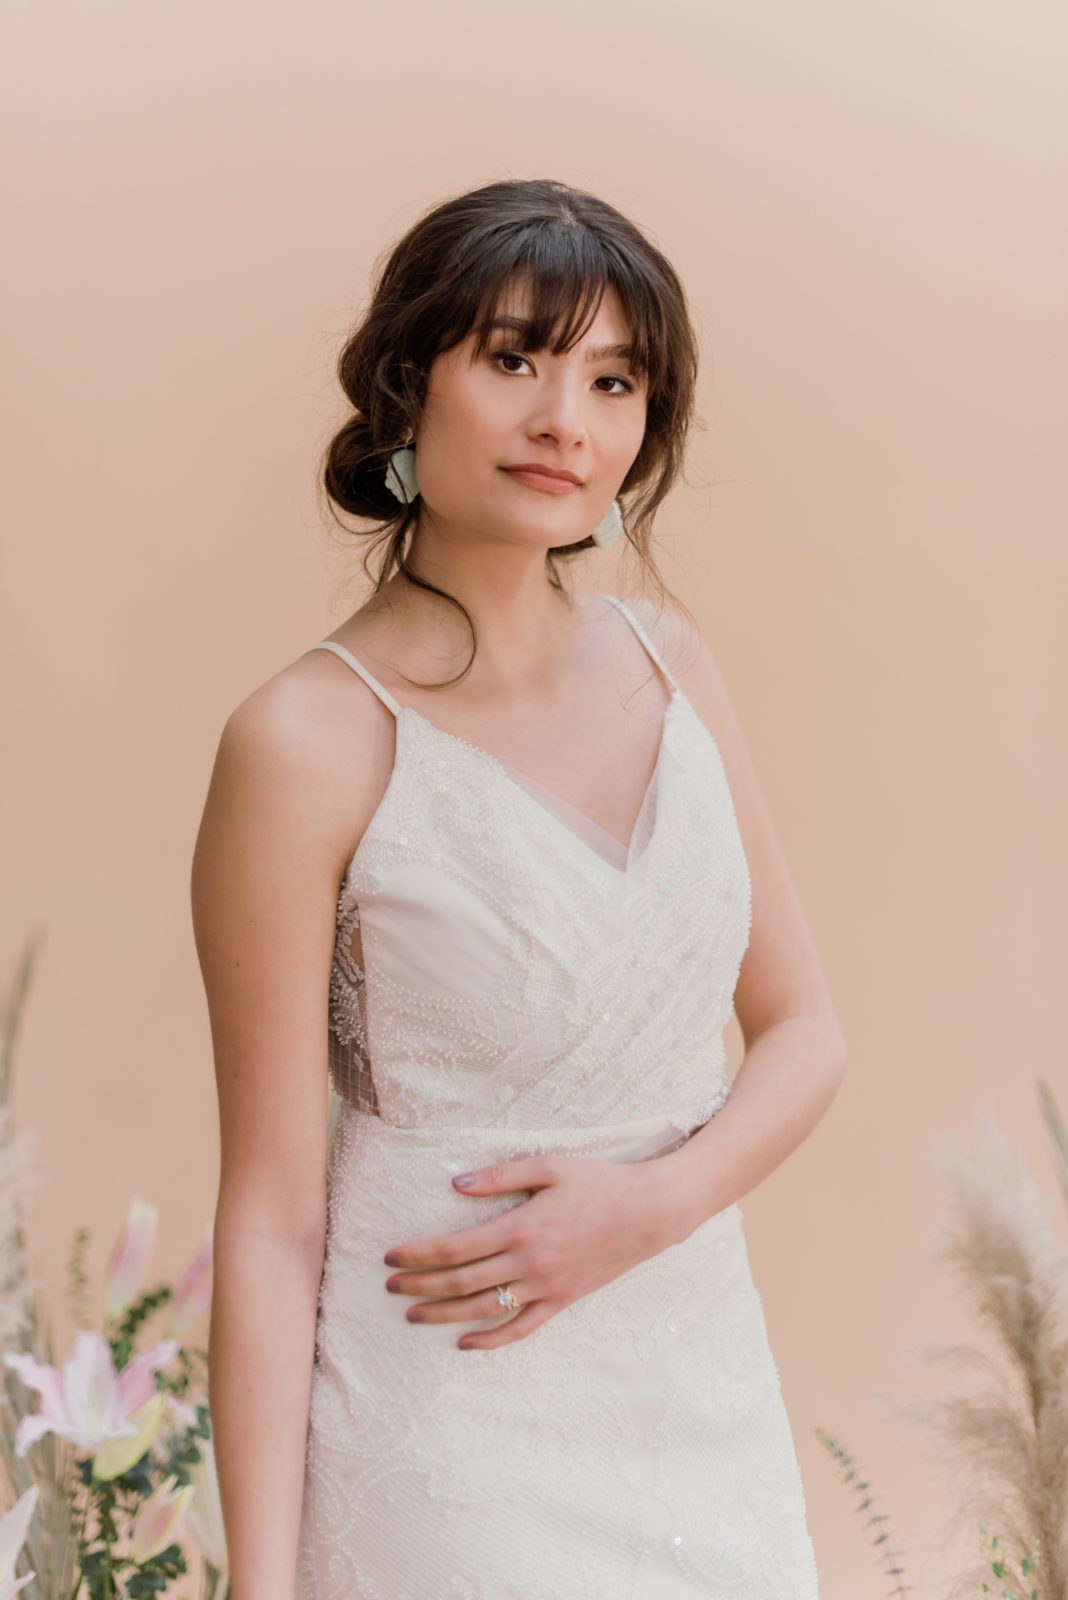 Bridal model poses in the Bree wedding dress by Laudae, a full beaded wedding gown